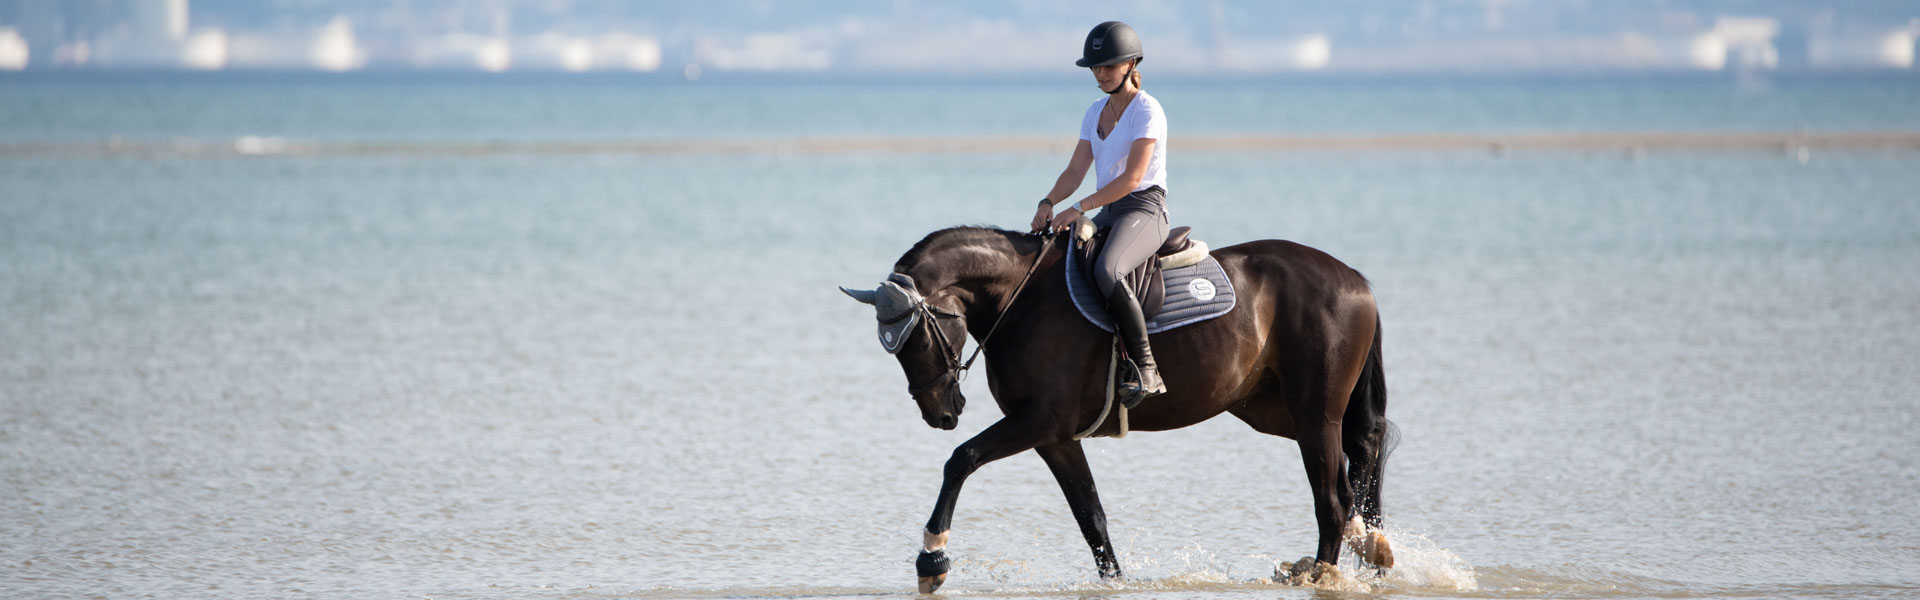 go to the beach with his horse photo water sea